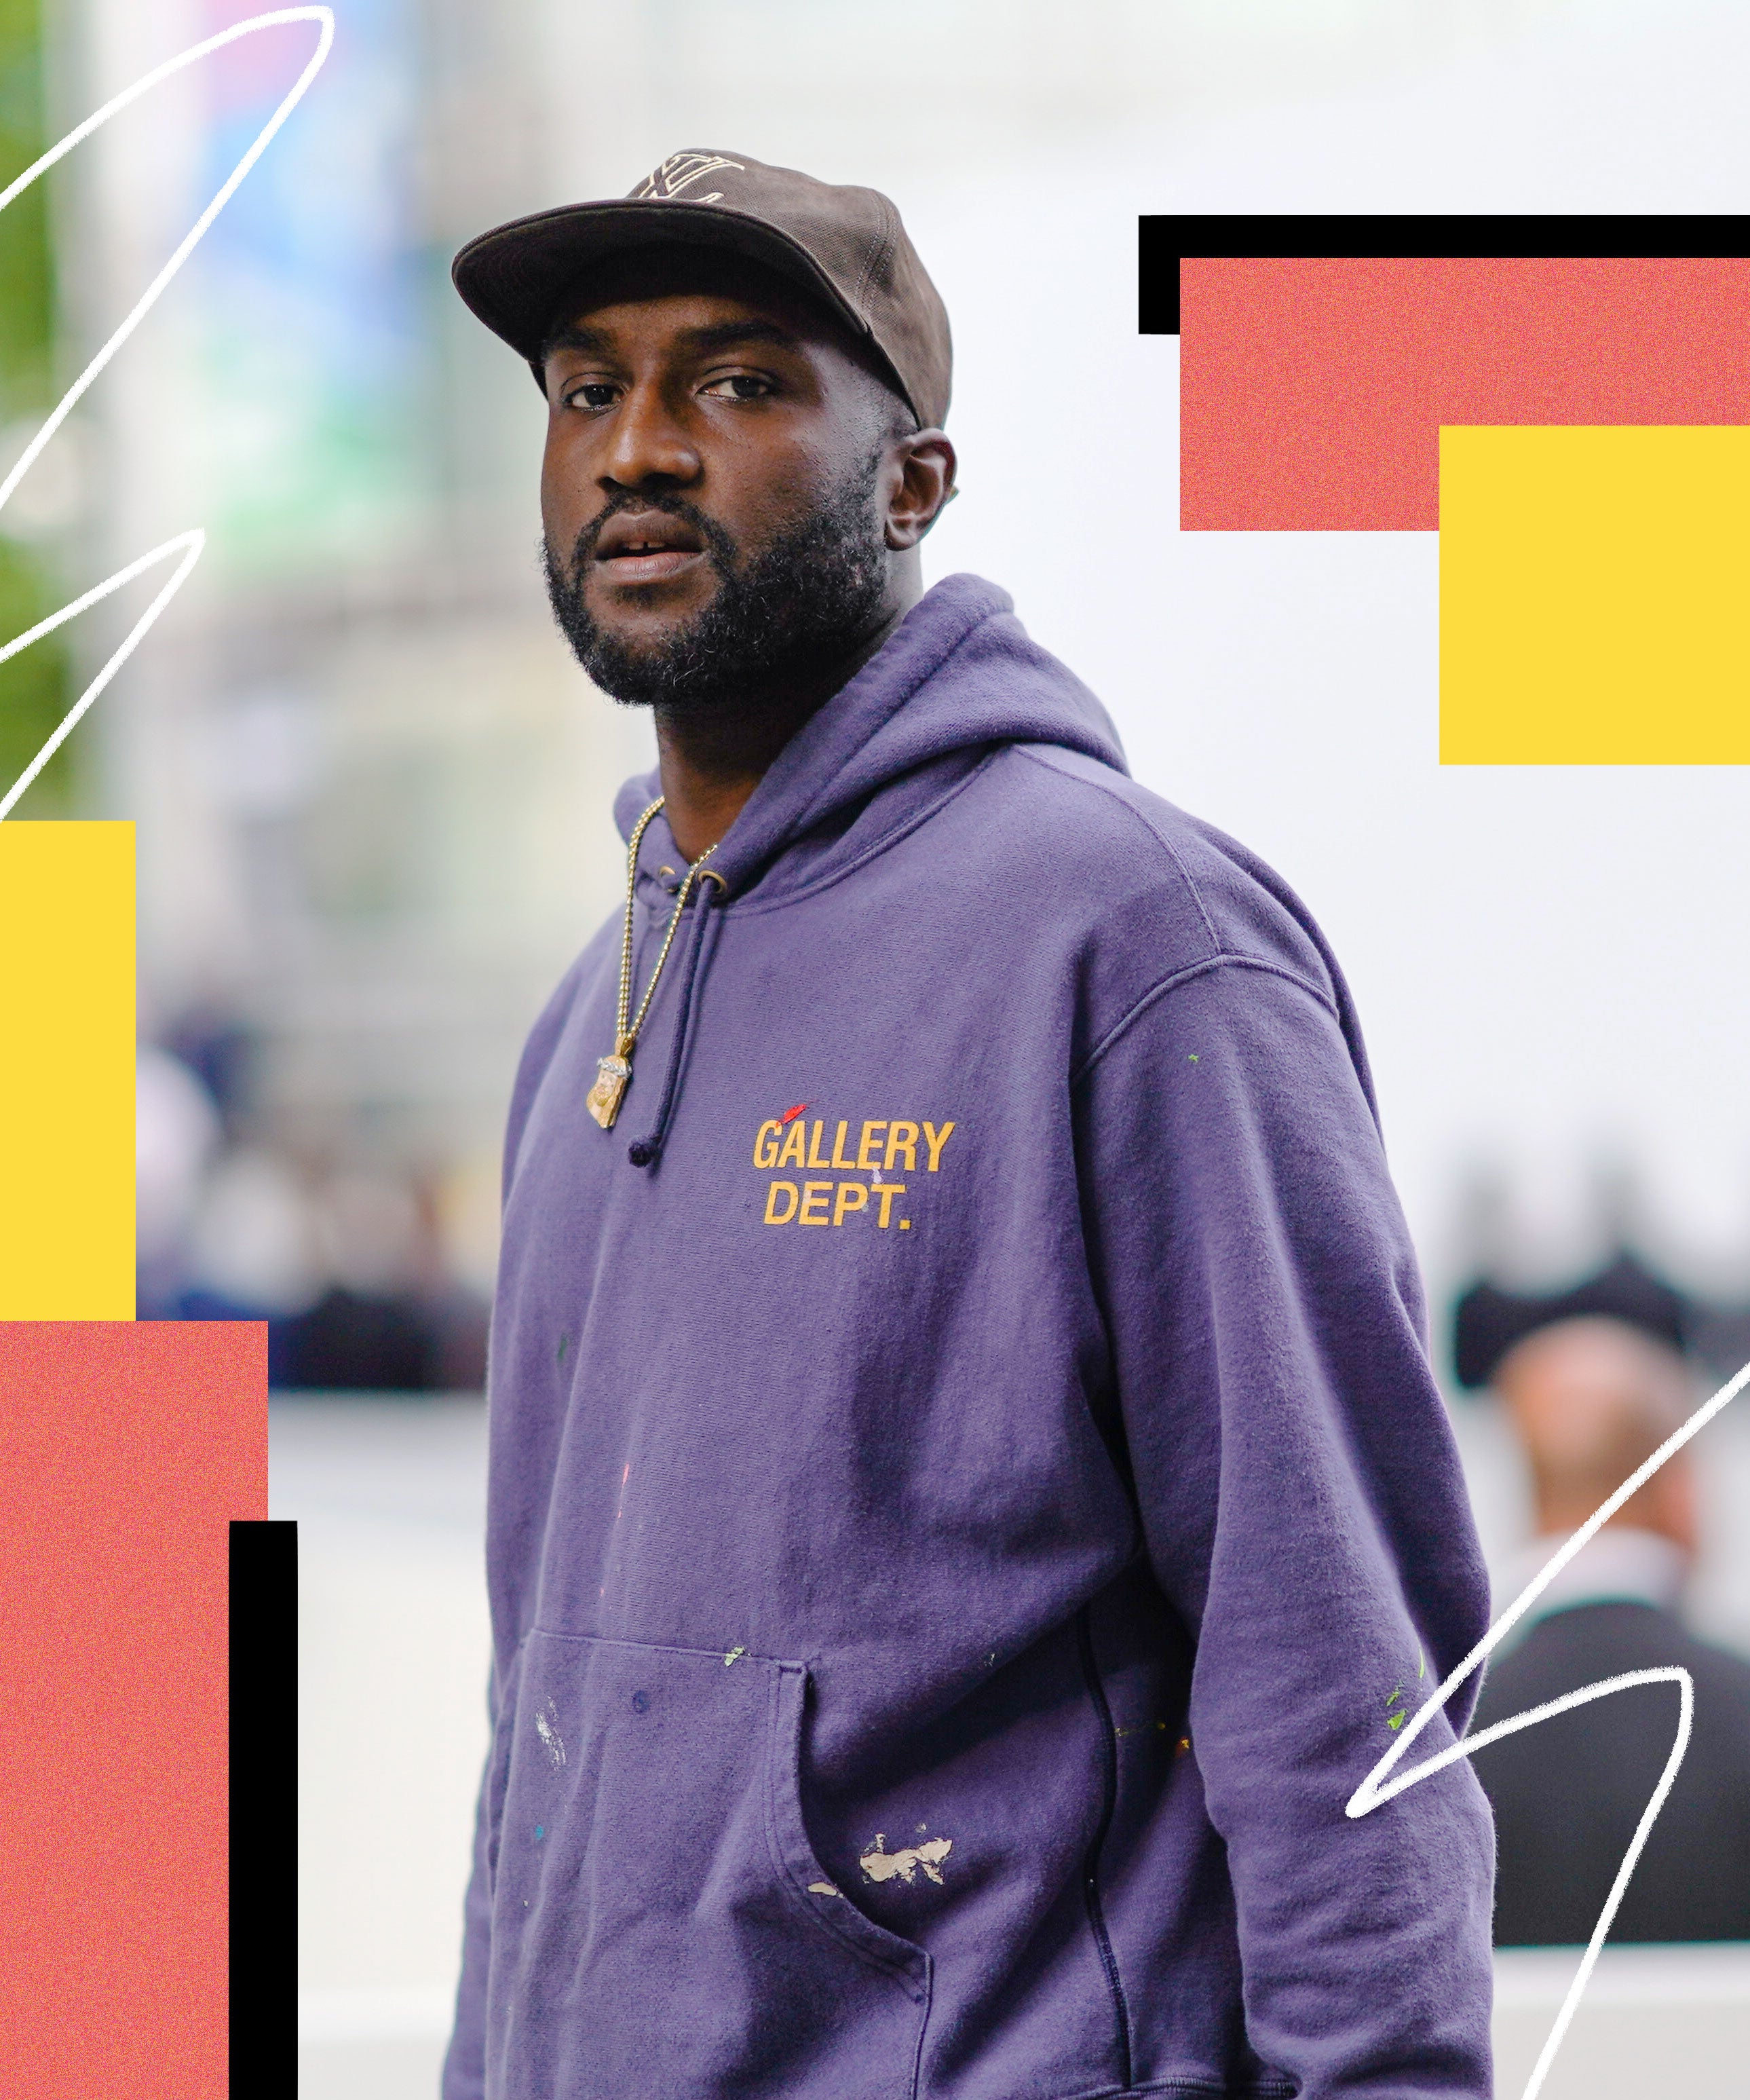 Virgil Abloh and Jacob & Co. Collab on Office Supplies - PAPER